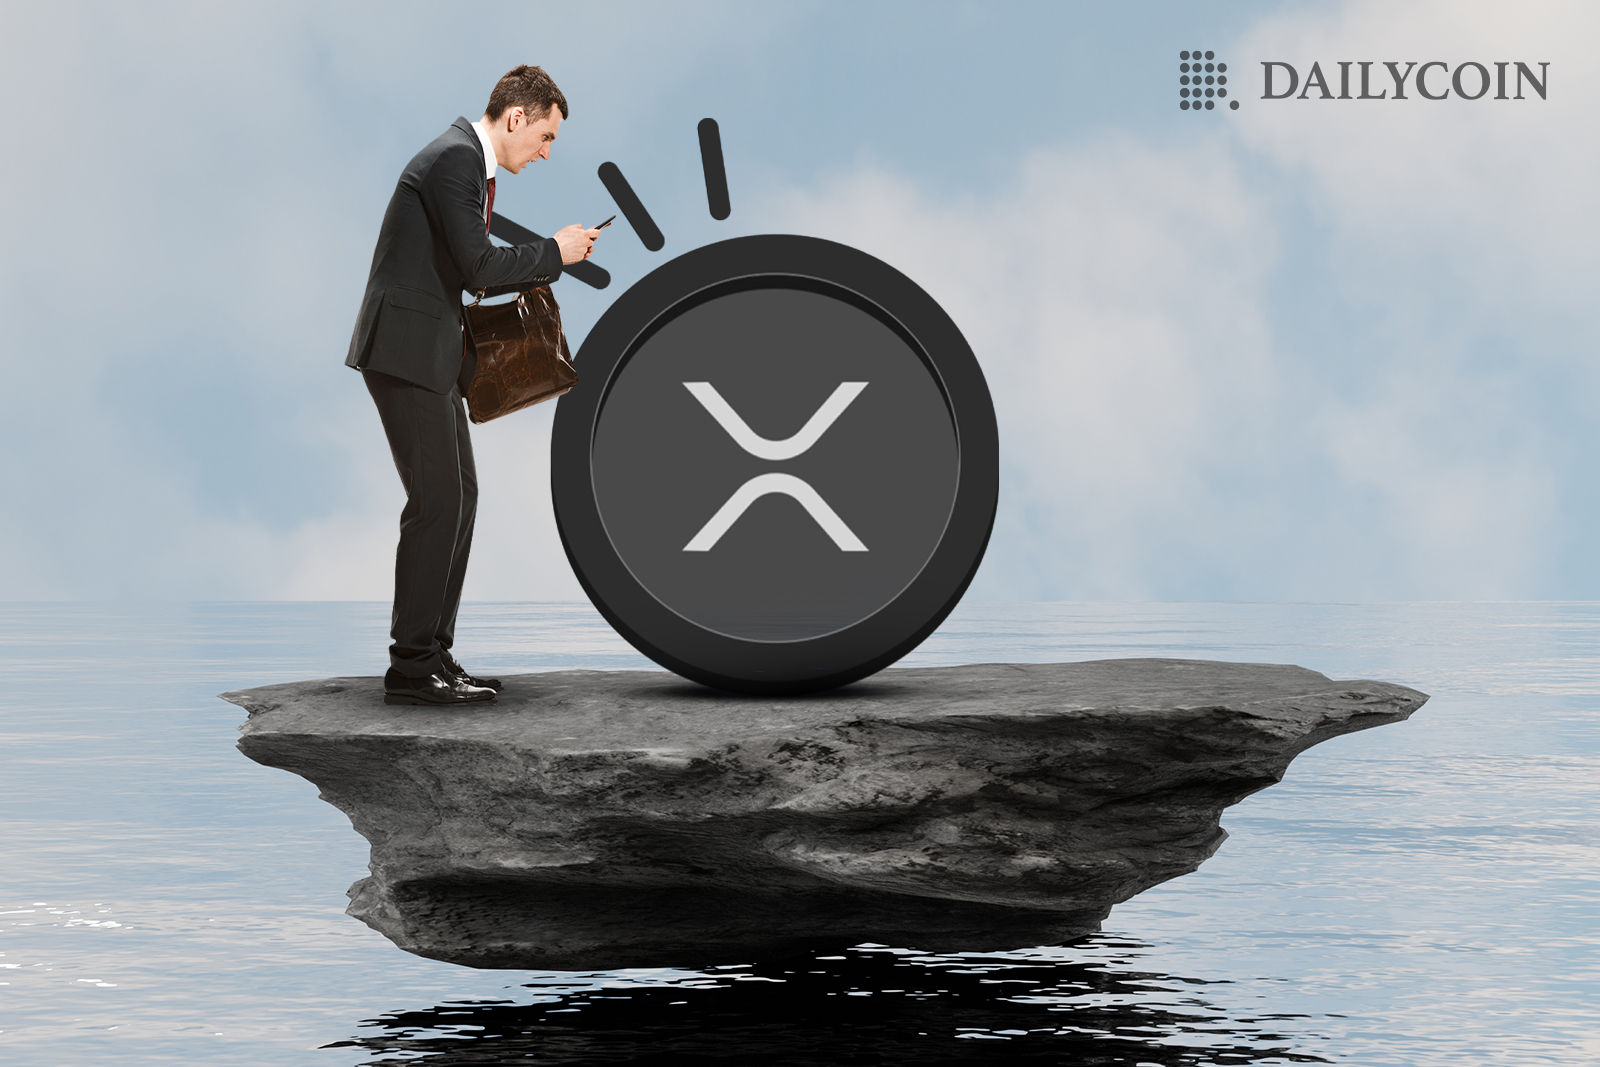 A man in a suit taking a photo of XRP token while standing on a rock platform above the water.